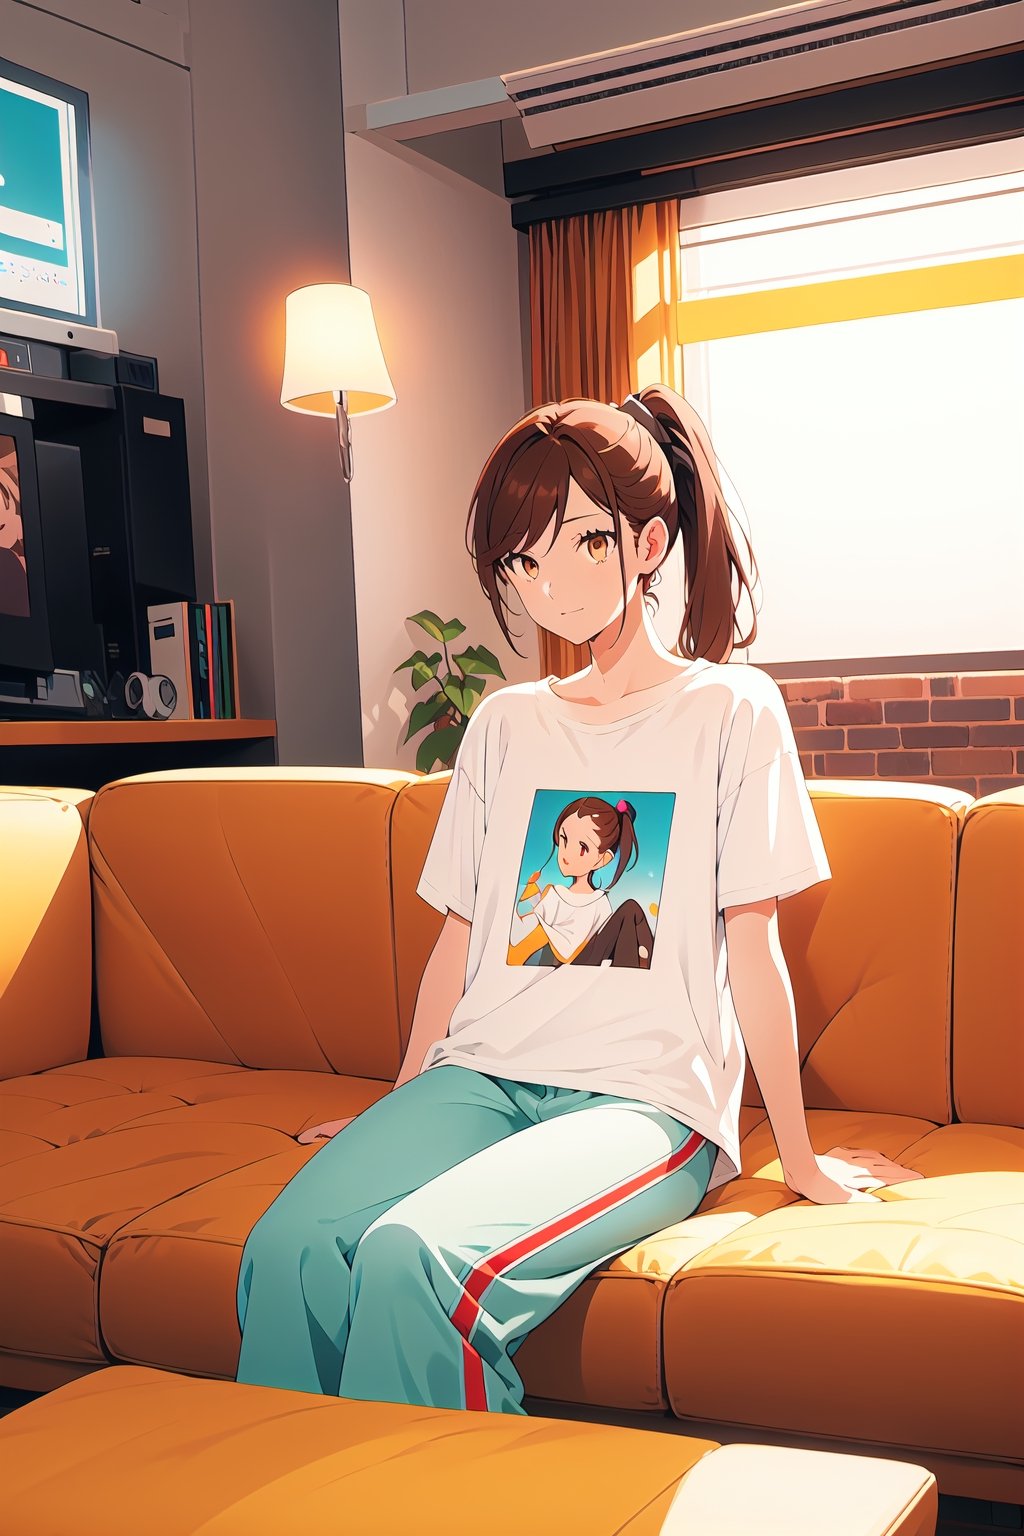 1girl,25 years old,ponytail,brown eyes,brown hair,portrait,oversized white t-shirt, vintage pant,illustration,fcloseup,rgbcolor, full_body, sitting, vintage sofa,front view, looking_at_viewer, smug look,photostudio,emotion,body looking forward, midnight